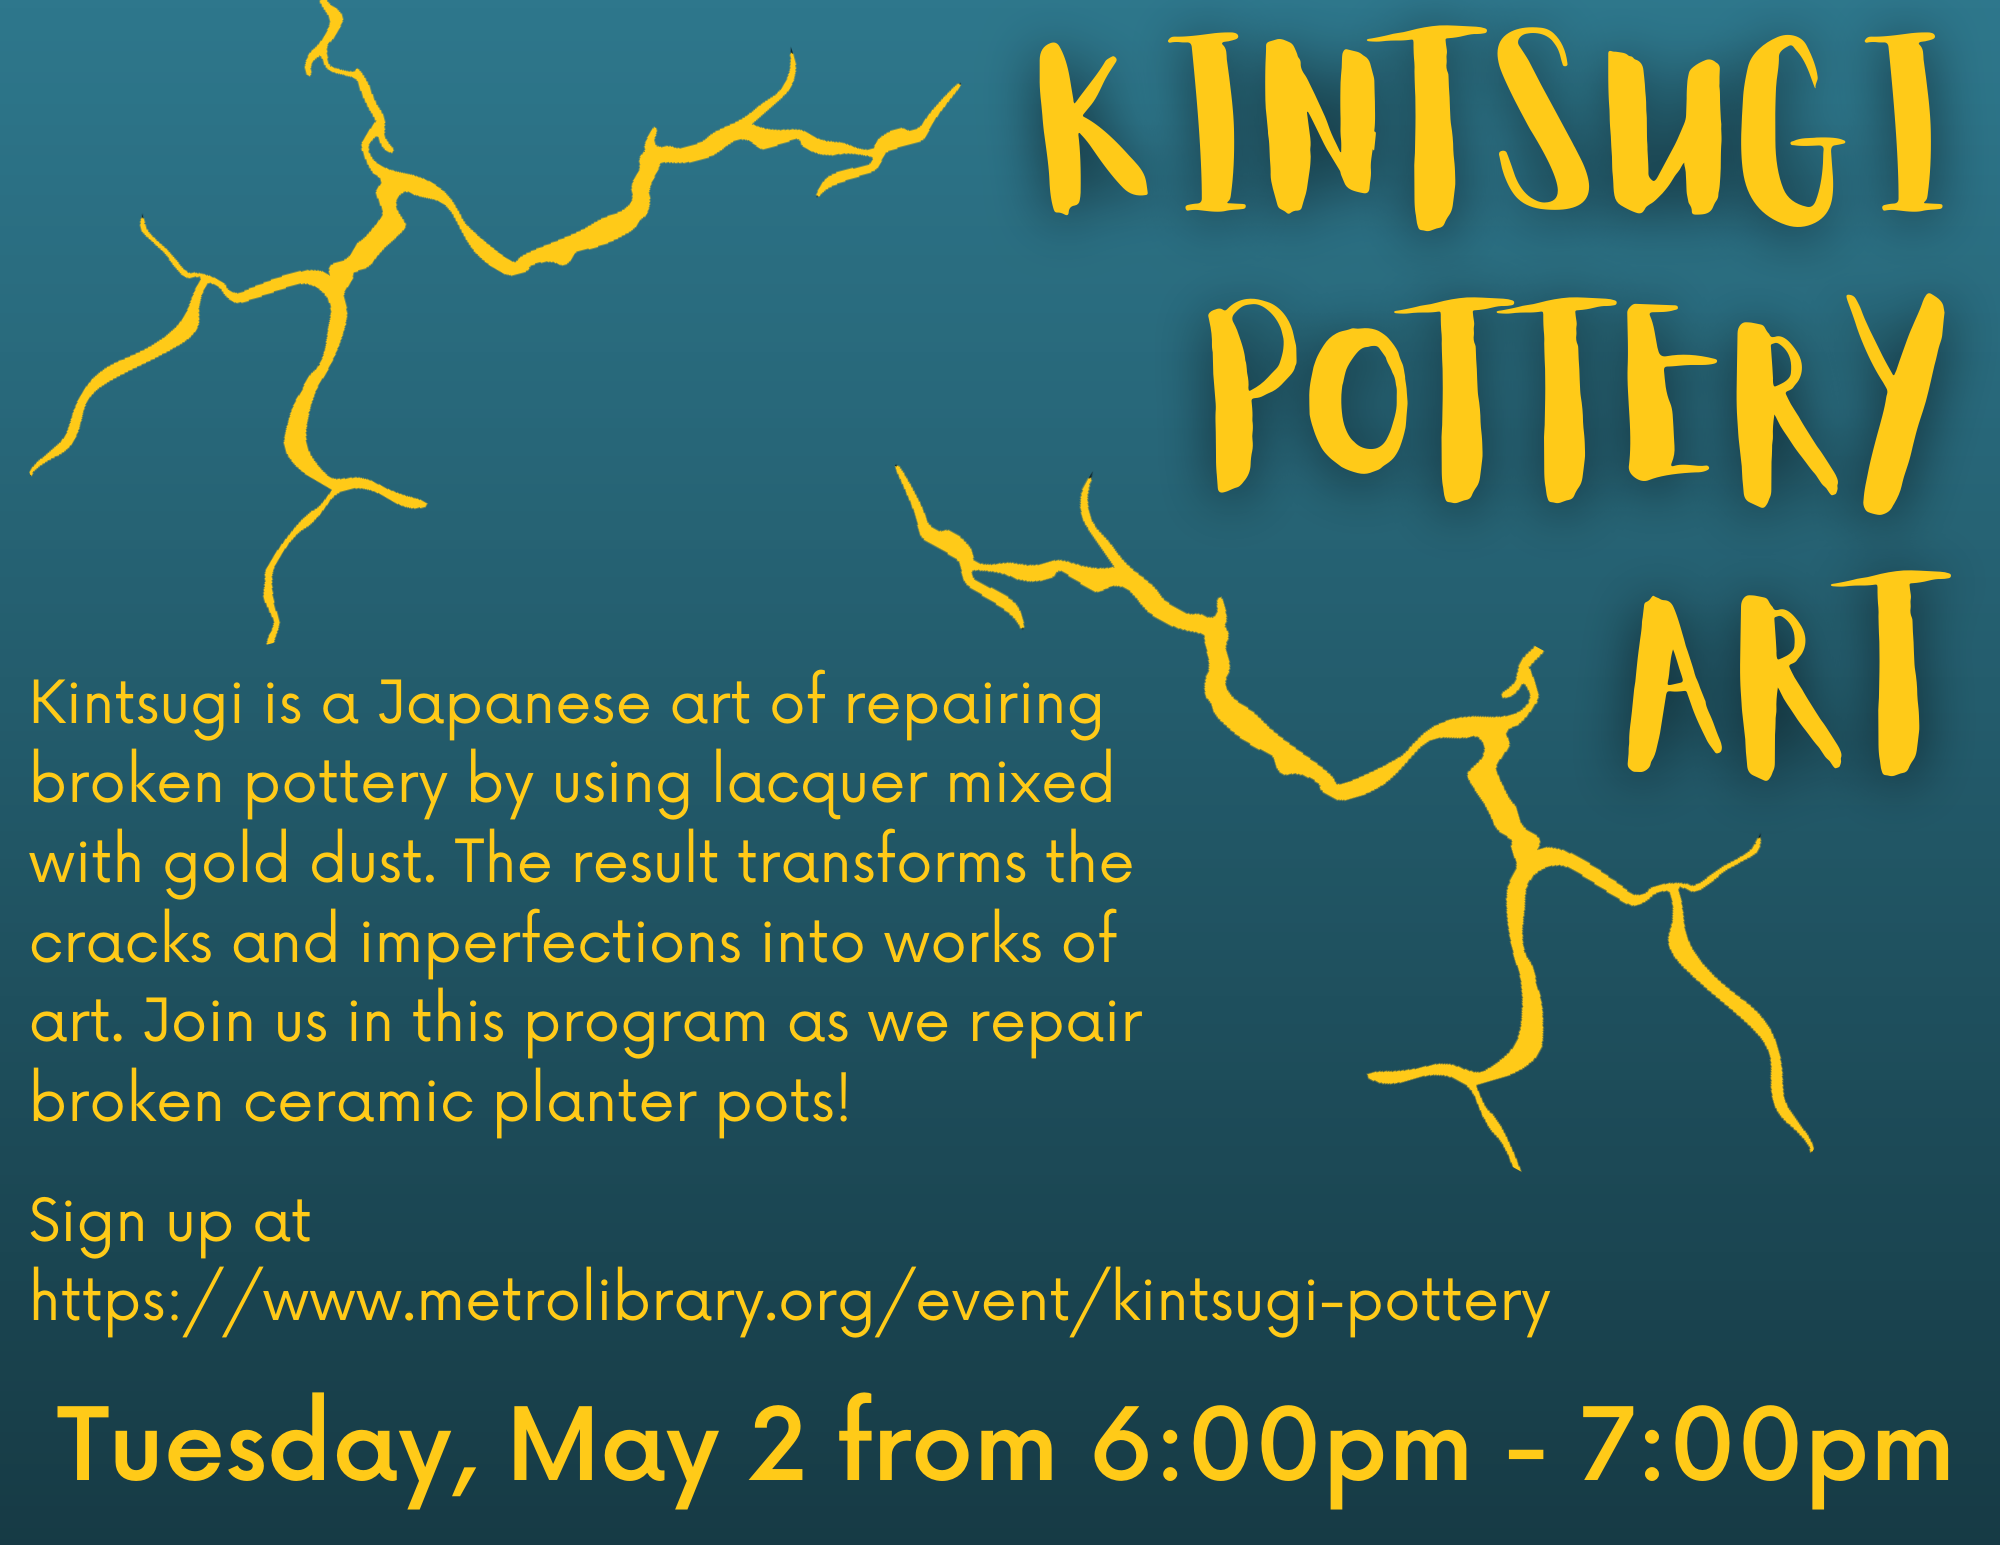 A flyer that says "KINTSUGI POTTERY ART" along with the background text for the program and the date of the program. The background is a gradient teal with yellow "cracks" simulating kintsugi art. 